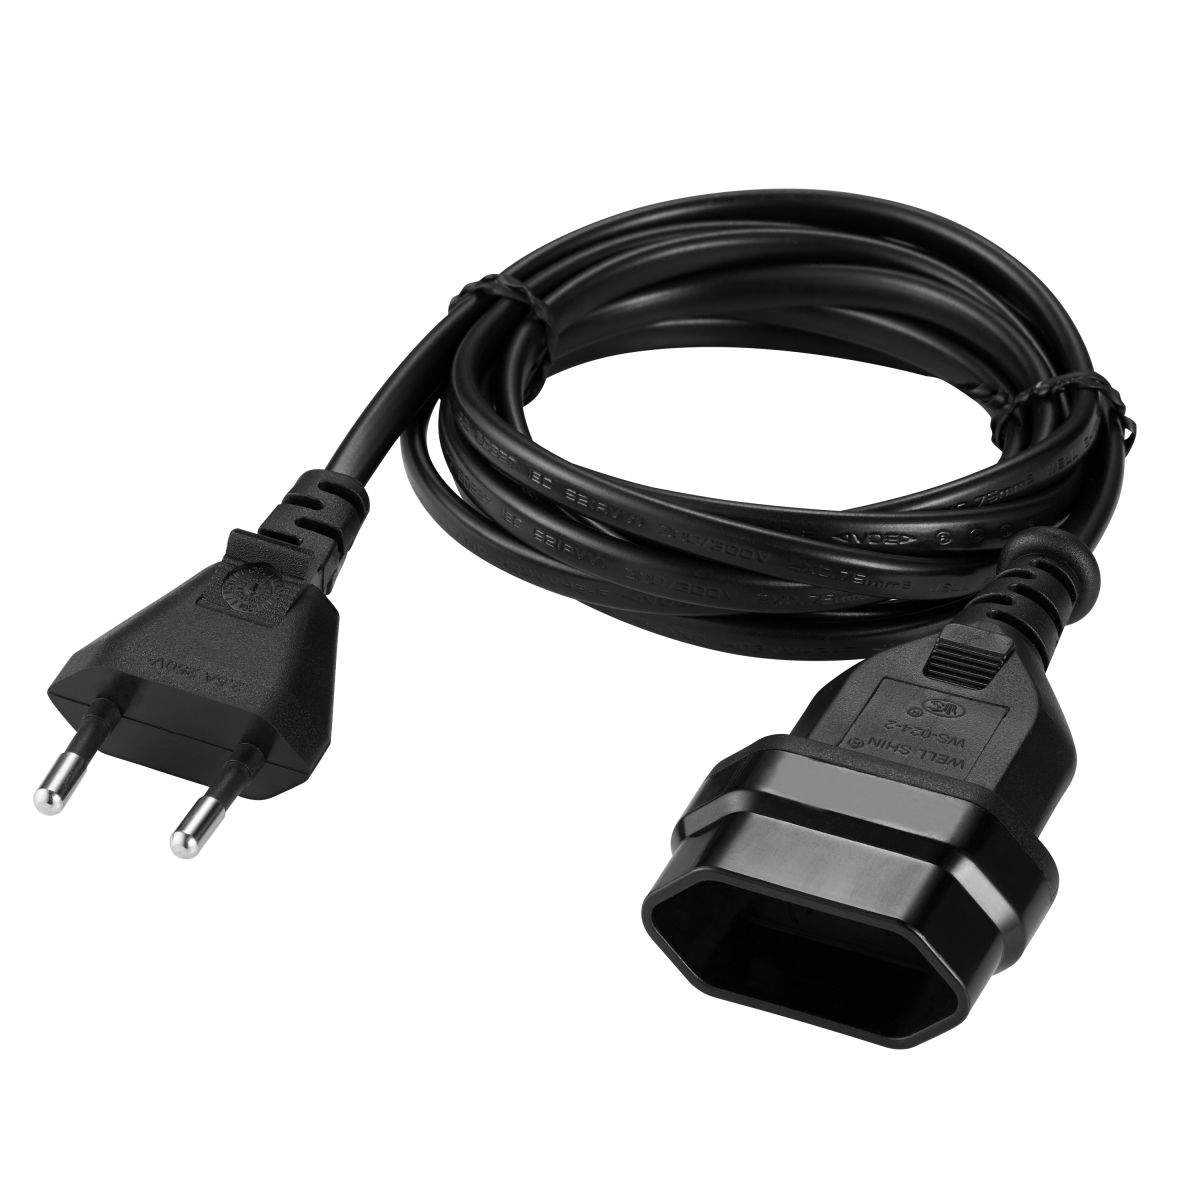 SWITCHED Easy Cable Extender Daisy Chain Kit 2M - Black